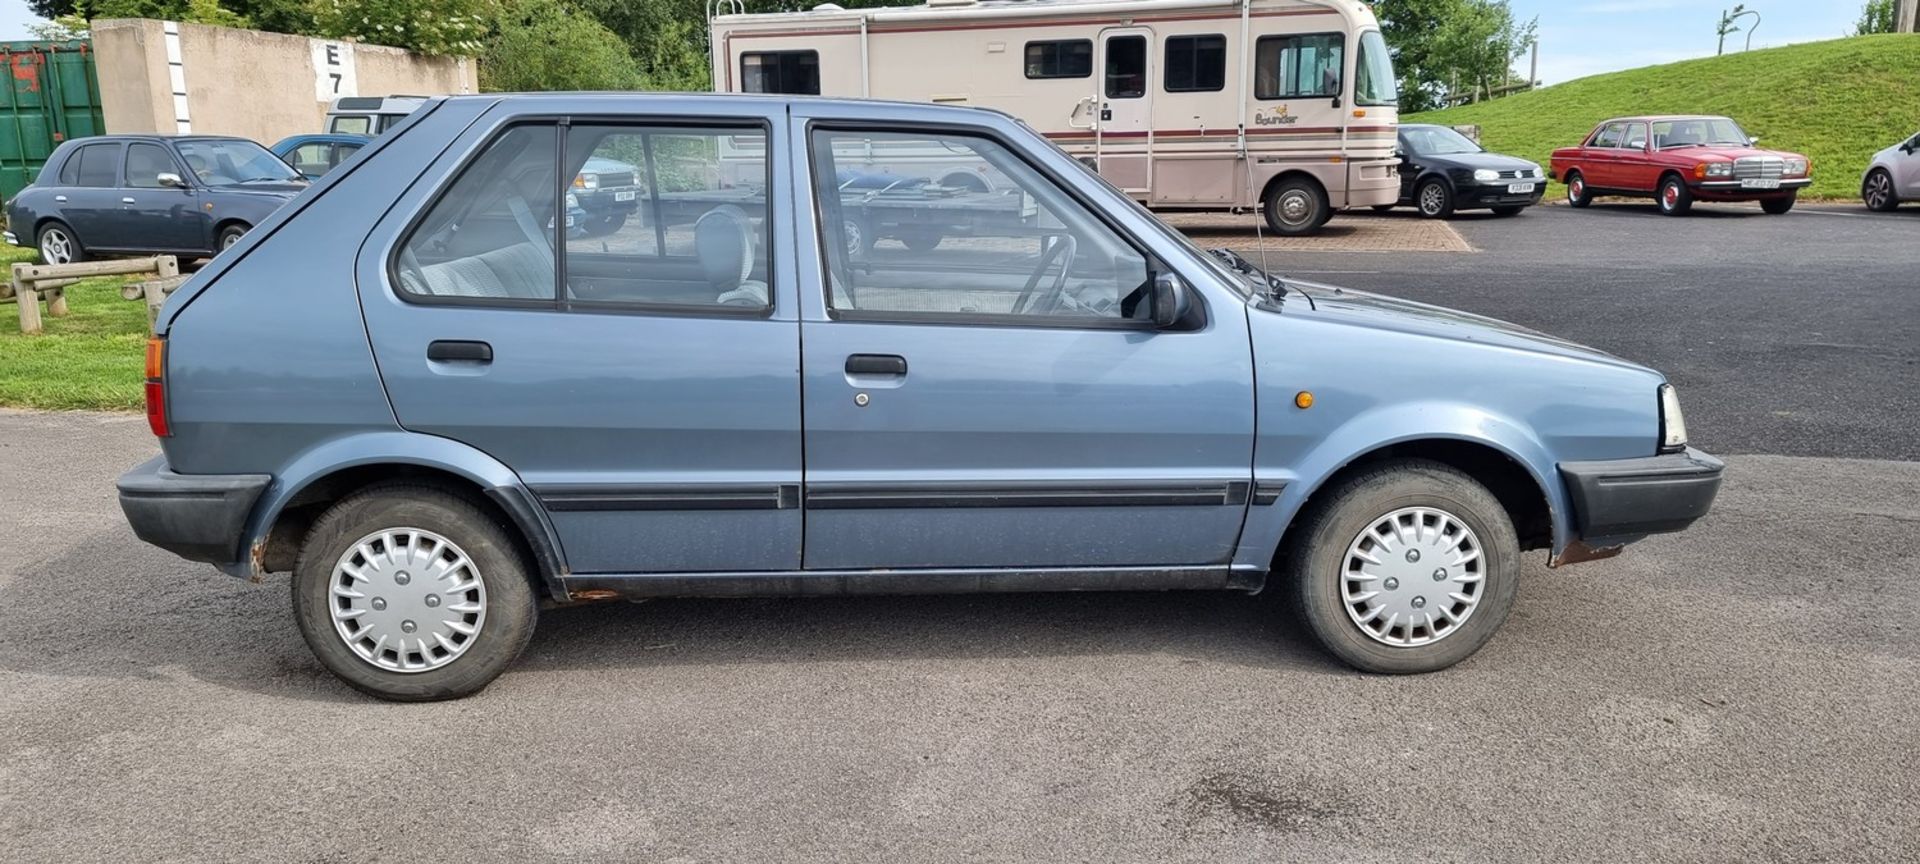 1987 Nissan Micra SGL automatic, 998cc. Registration number E549 BPU. Chassis number K10 429826. - Image 7 of 15